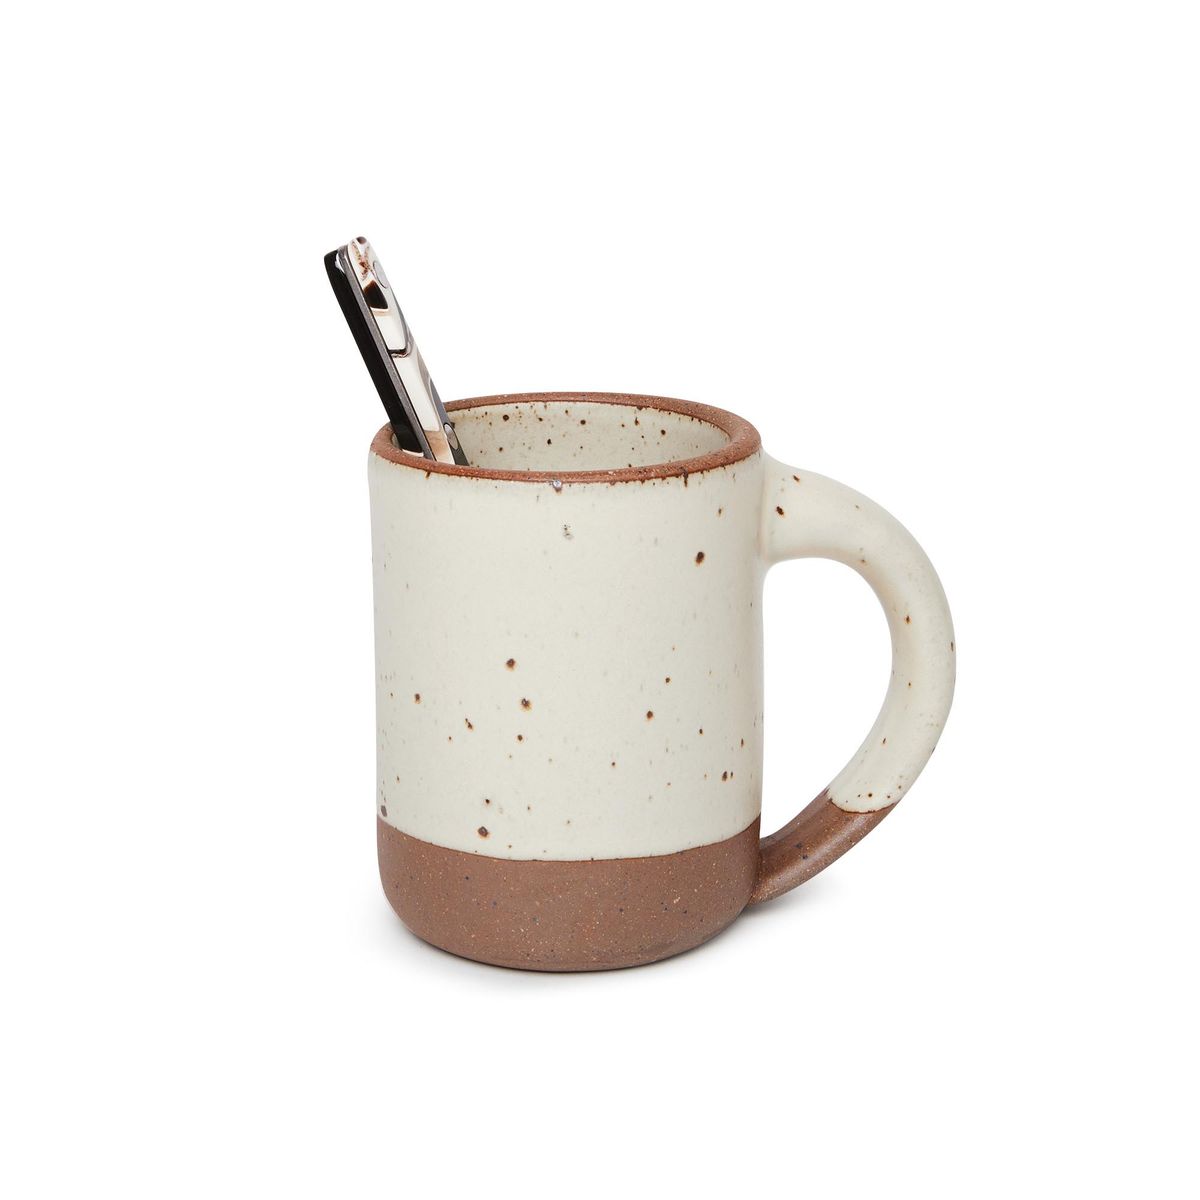 A spoon sitting in a medium sized ceramic mug with handle in a warm, tan-toned, off-white color featuring iron speckles and unglazed rim and bottom base.